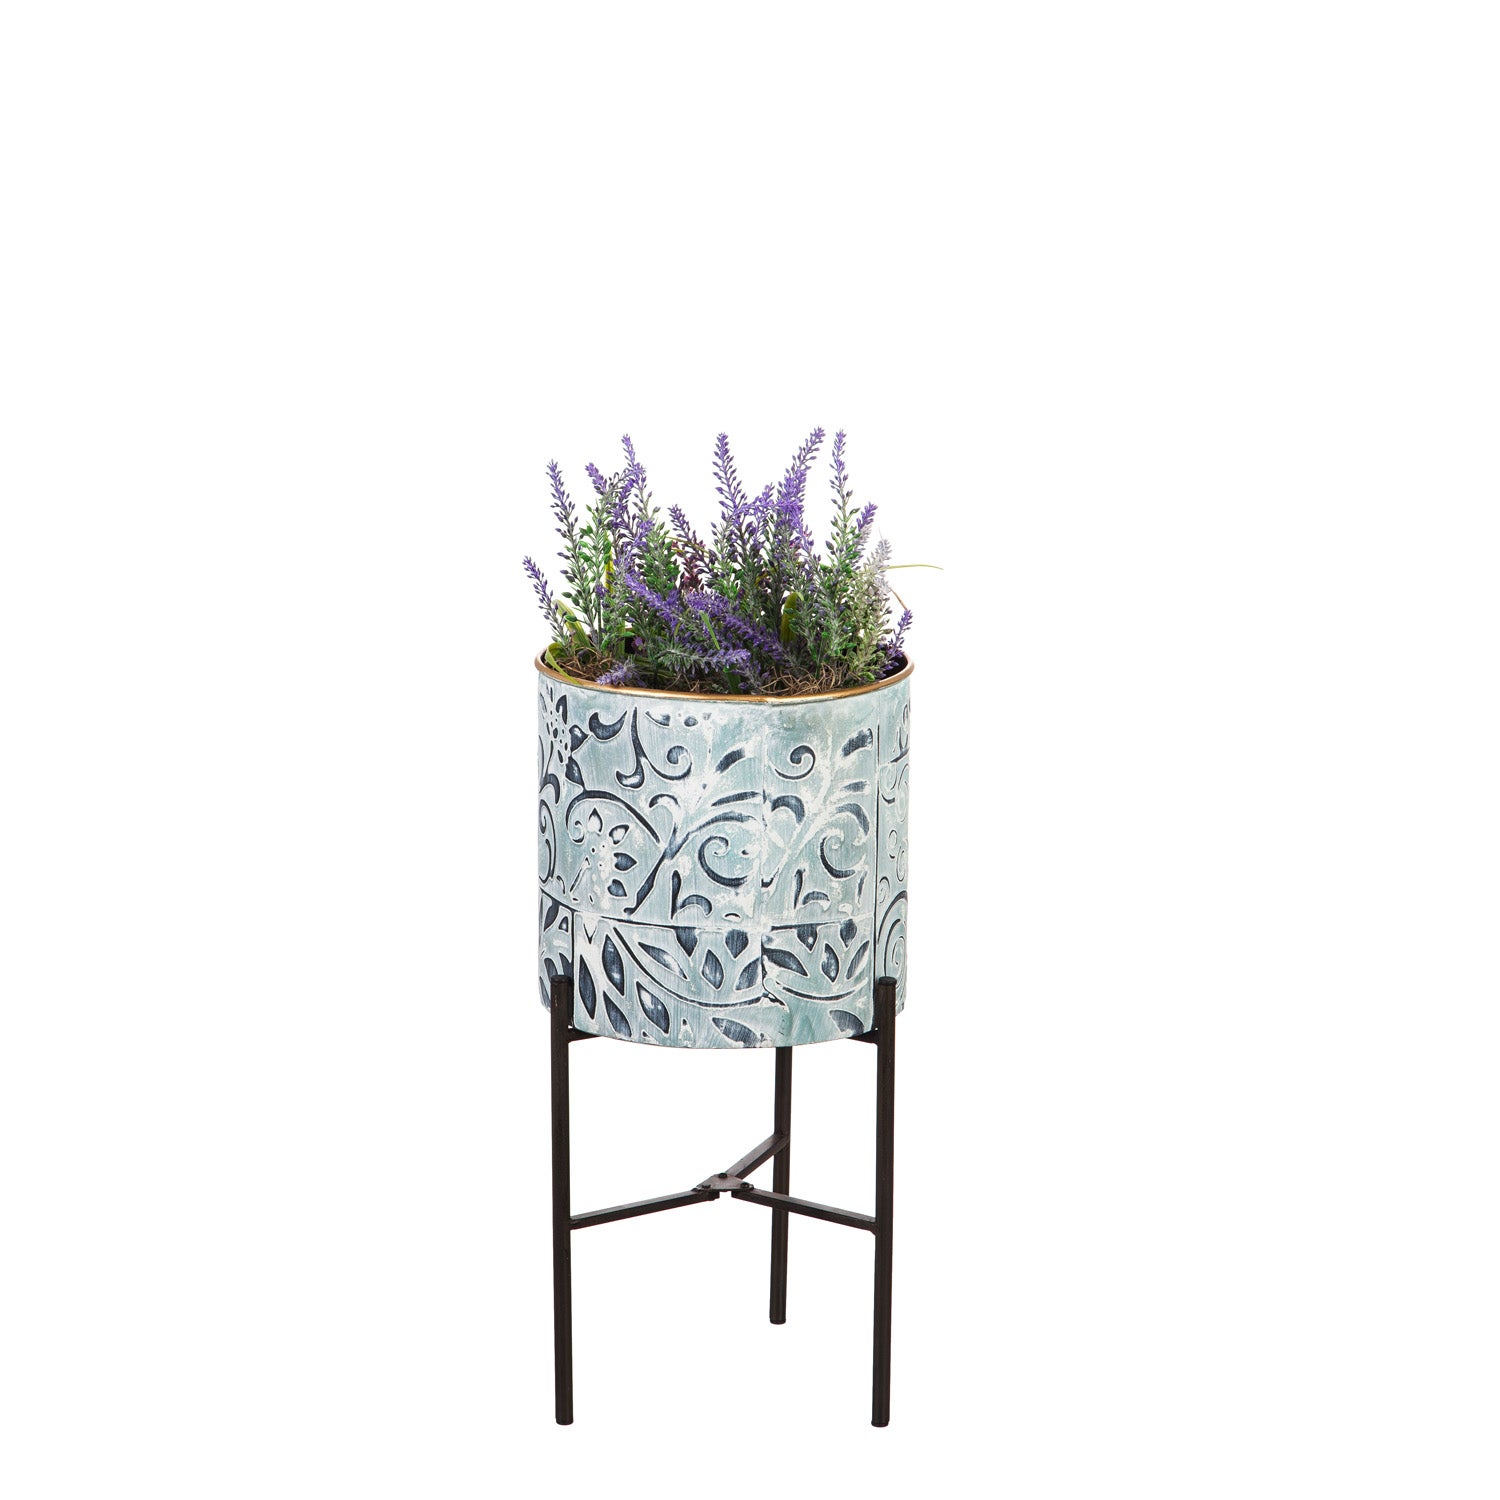 Painted Metal Planters with Stand, Set of 3